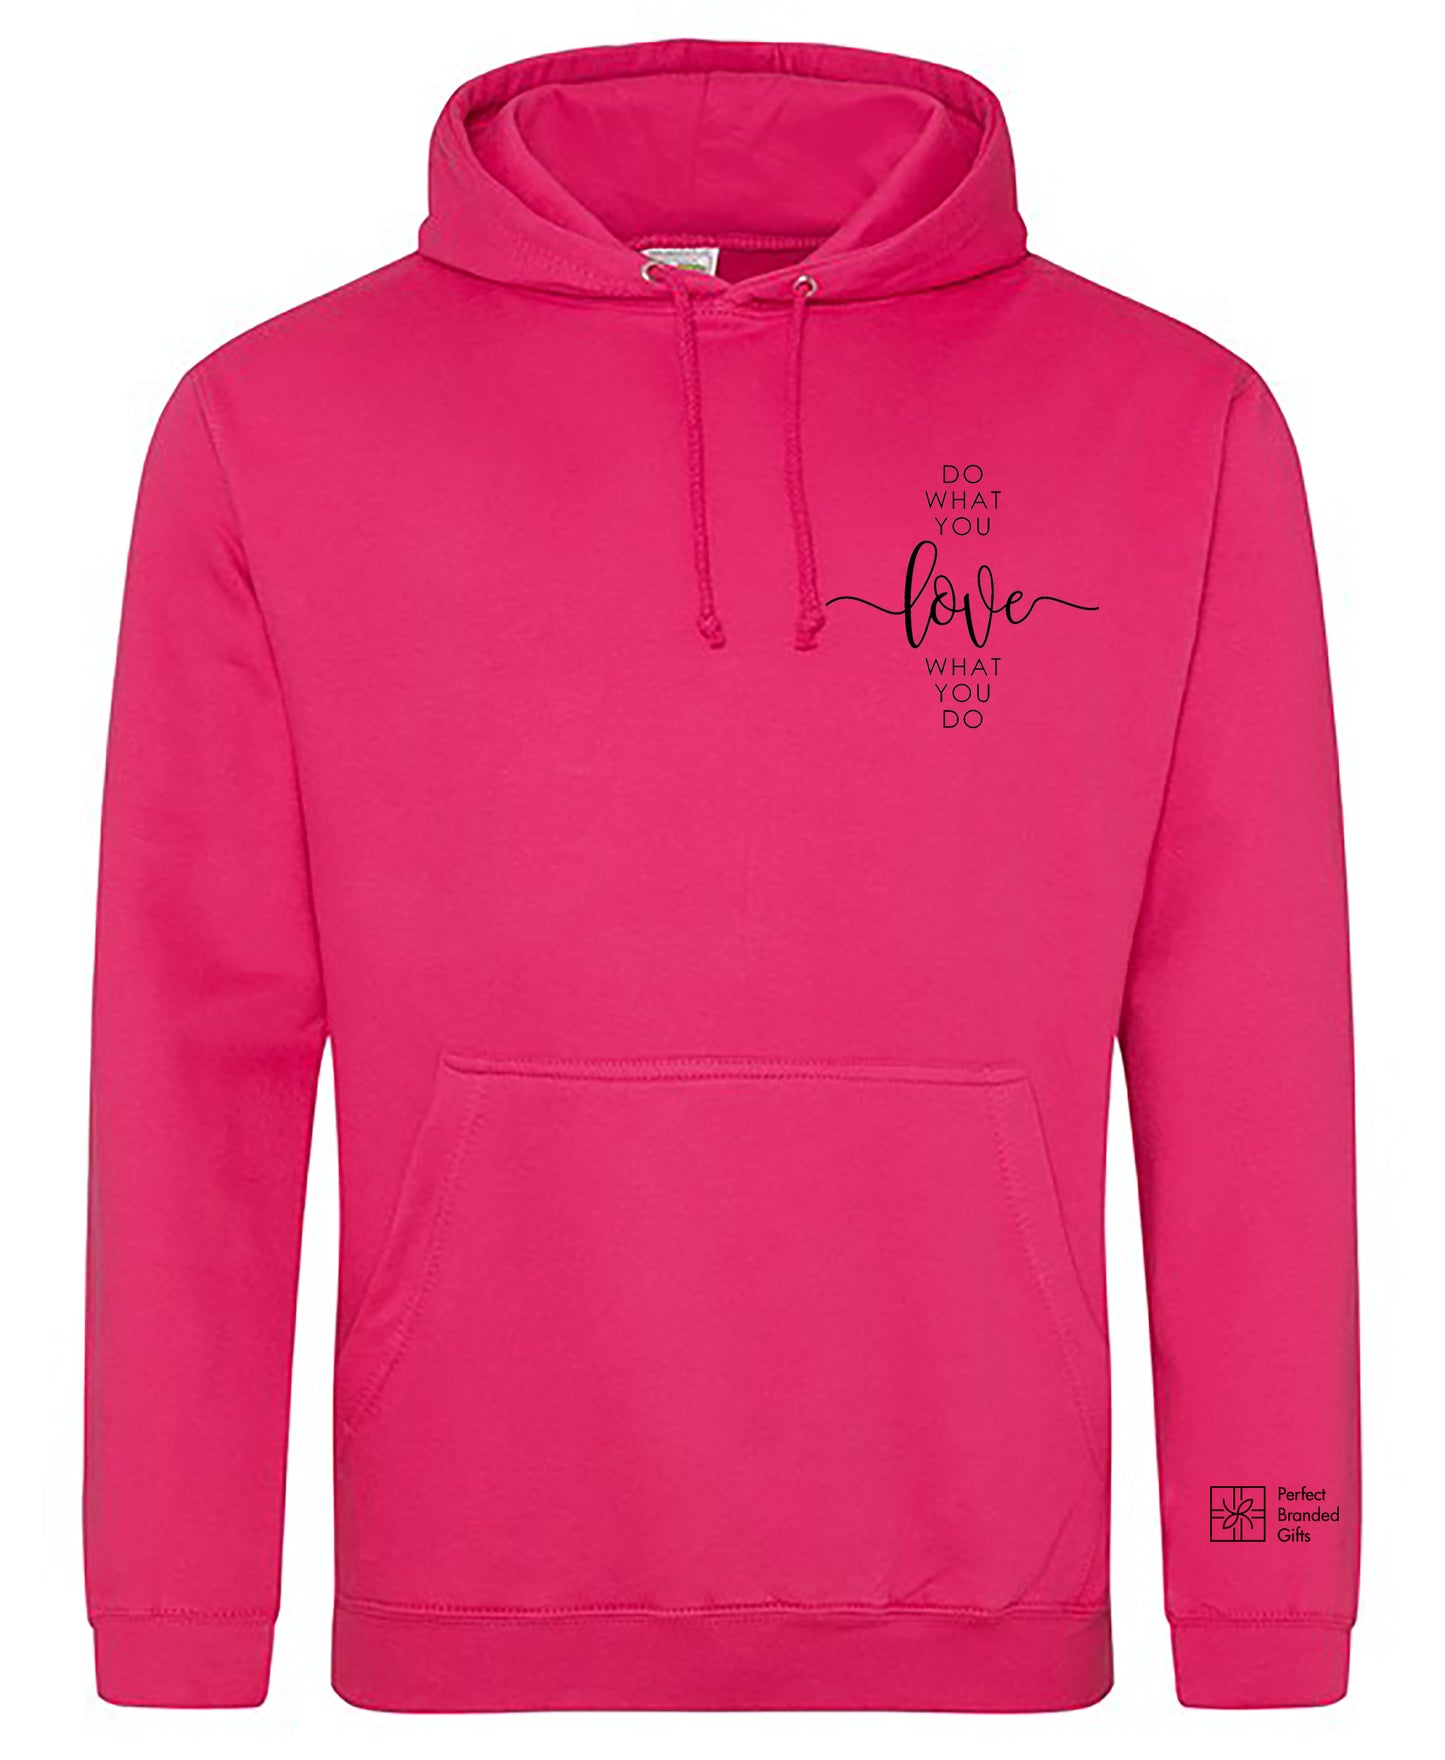 Valentine's Day Promotional Hoodie